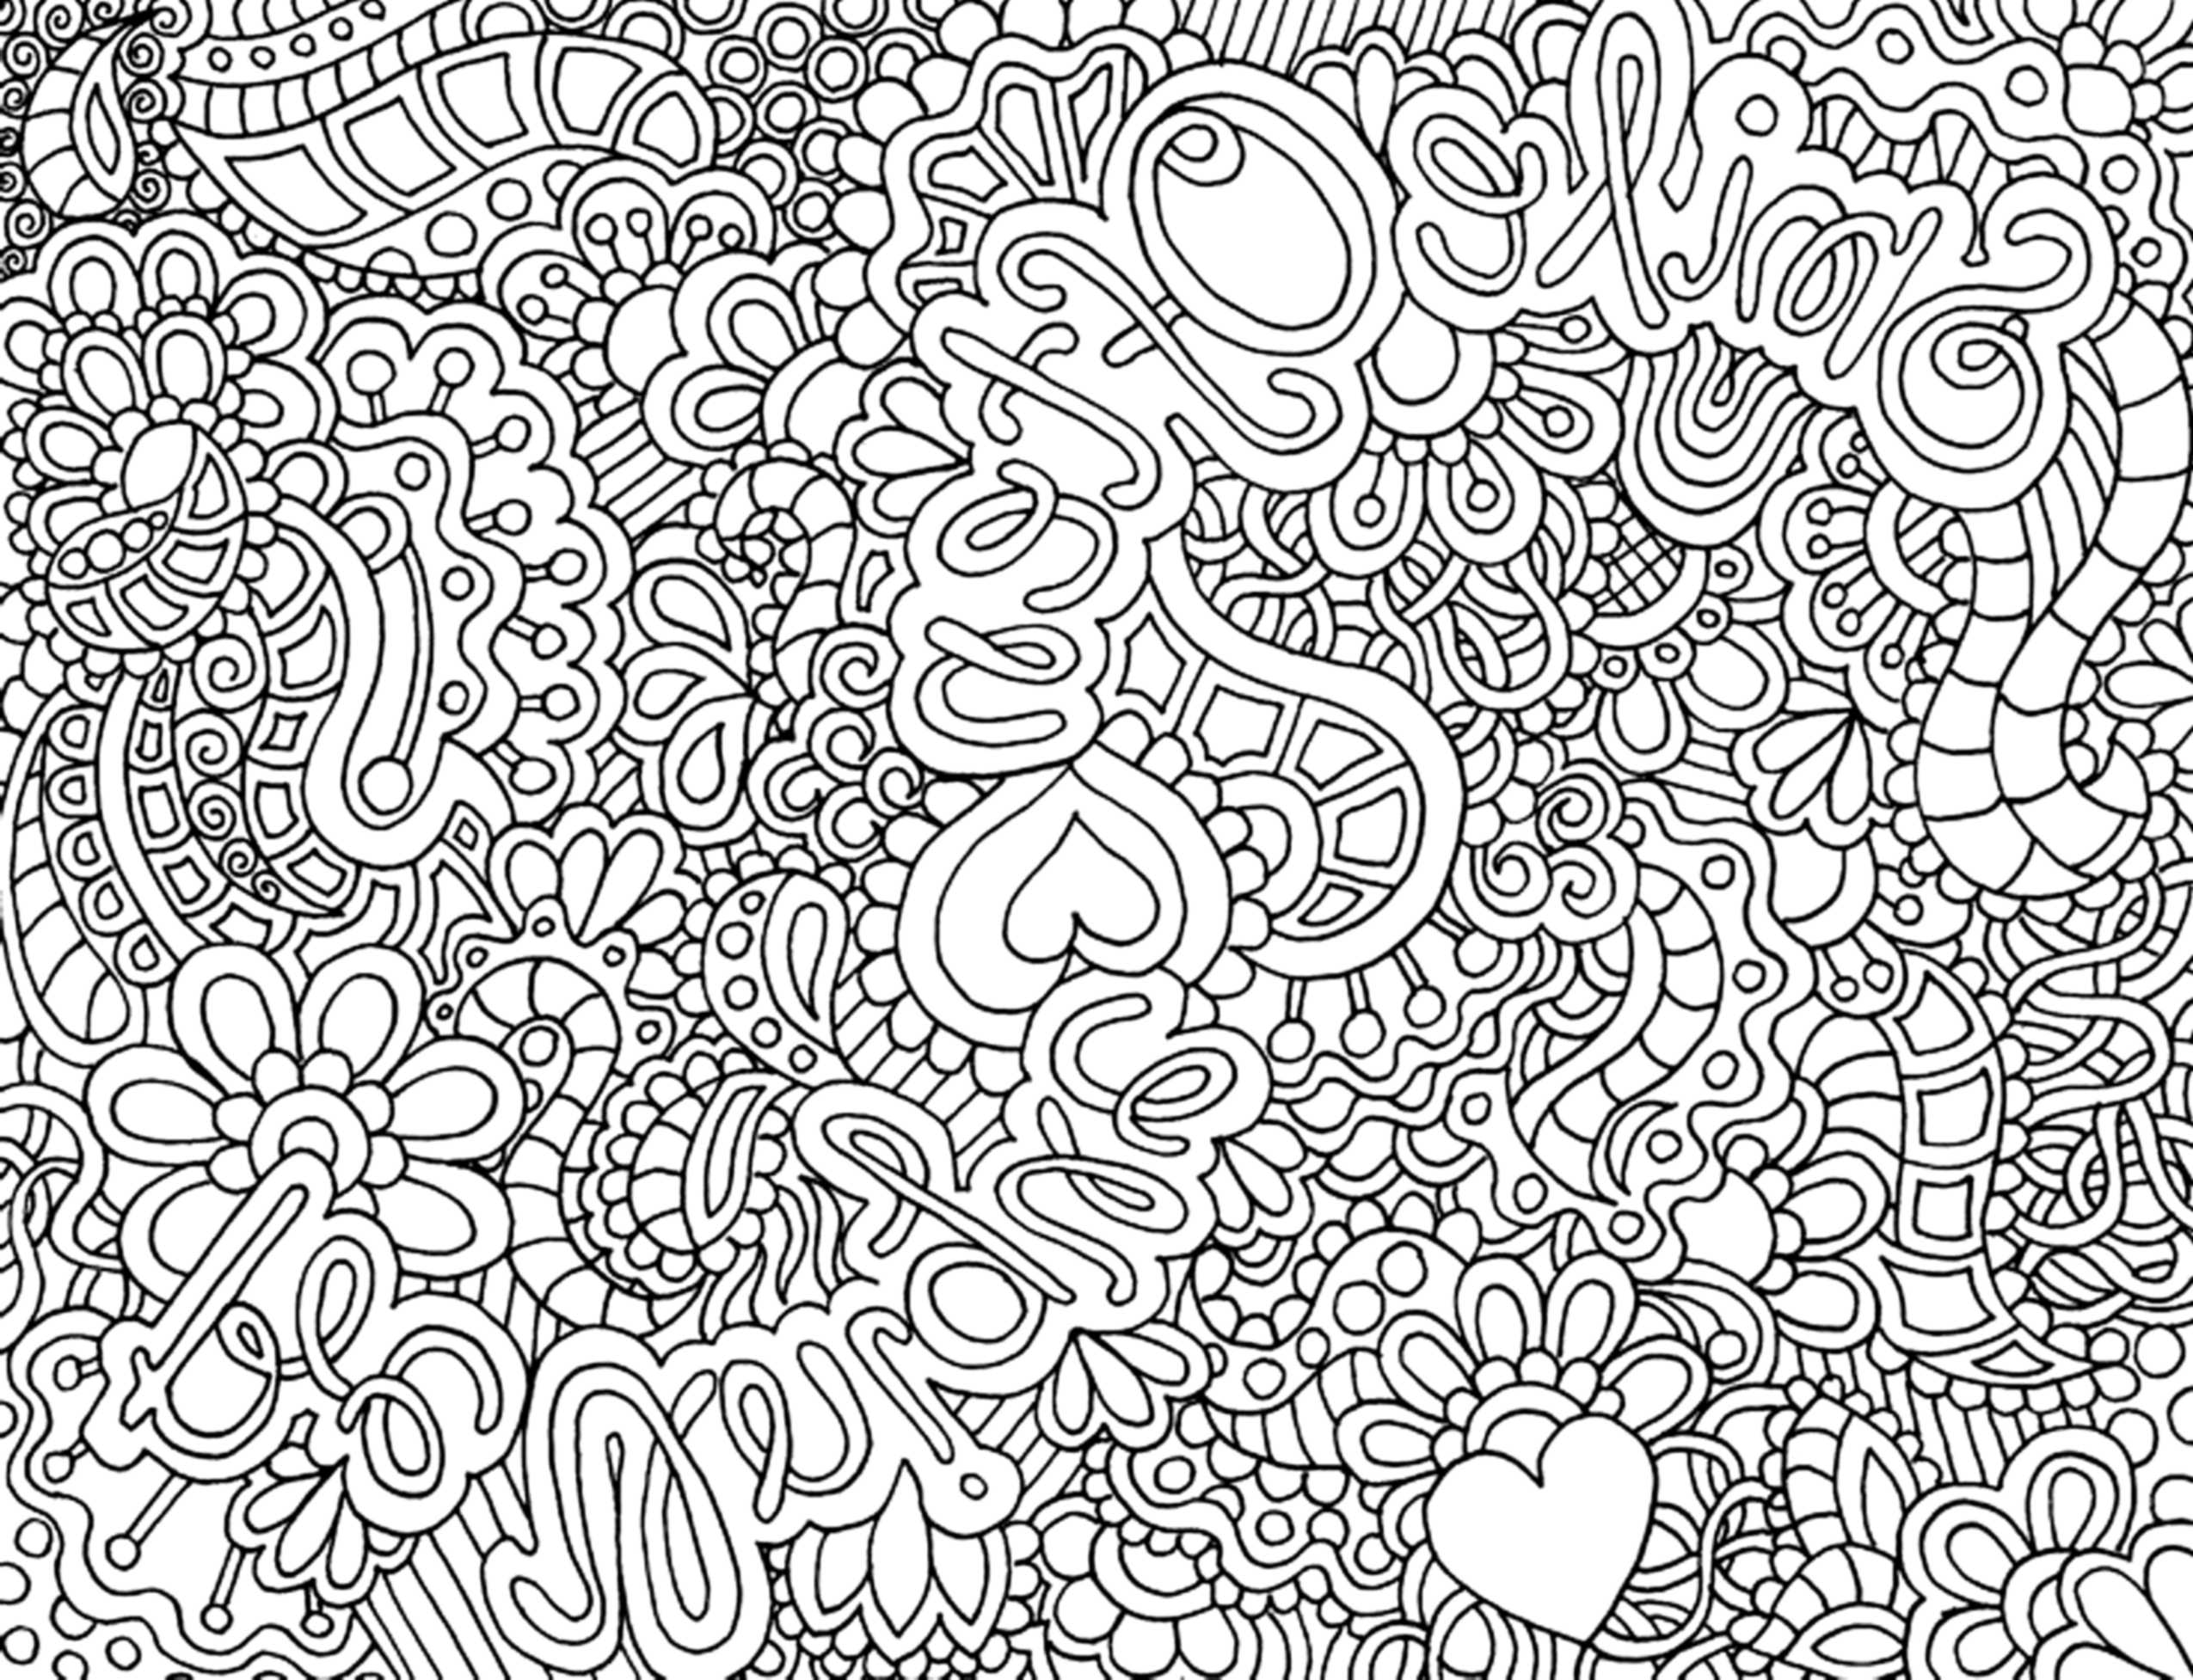 print-download-complex-coloring-pages-for-kids-and-adults